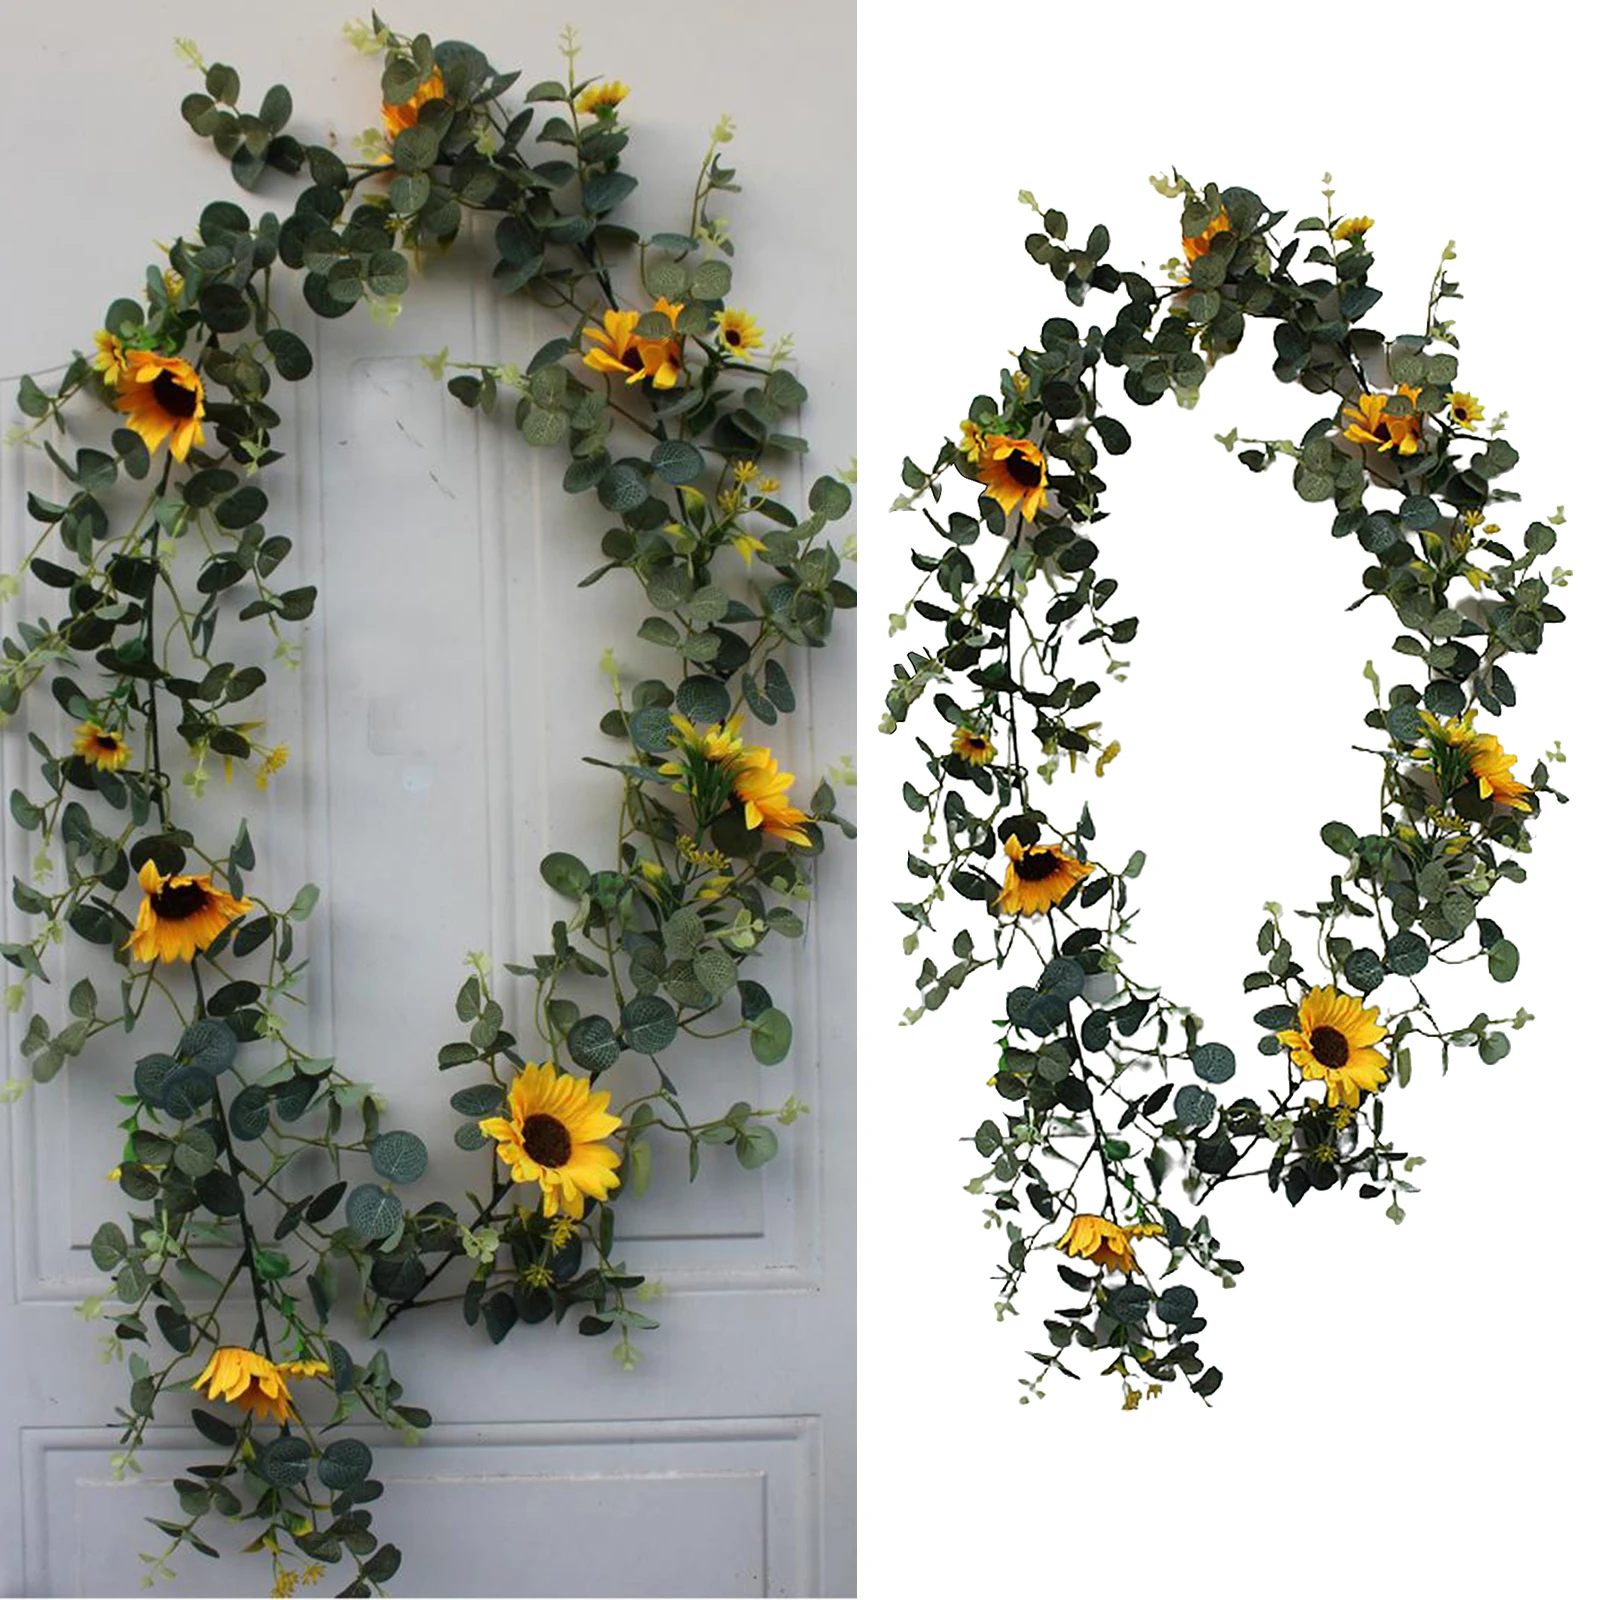 Artificial  Wreath Eucalyptus Leaves ing Fake Plants Vines Rattan Garland for DIY Wedding Party Wall Backdrop Decor